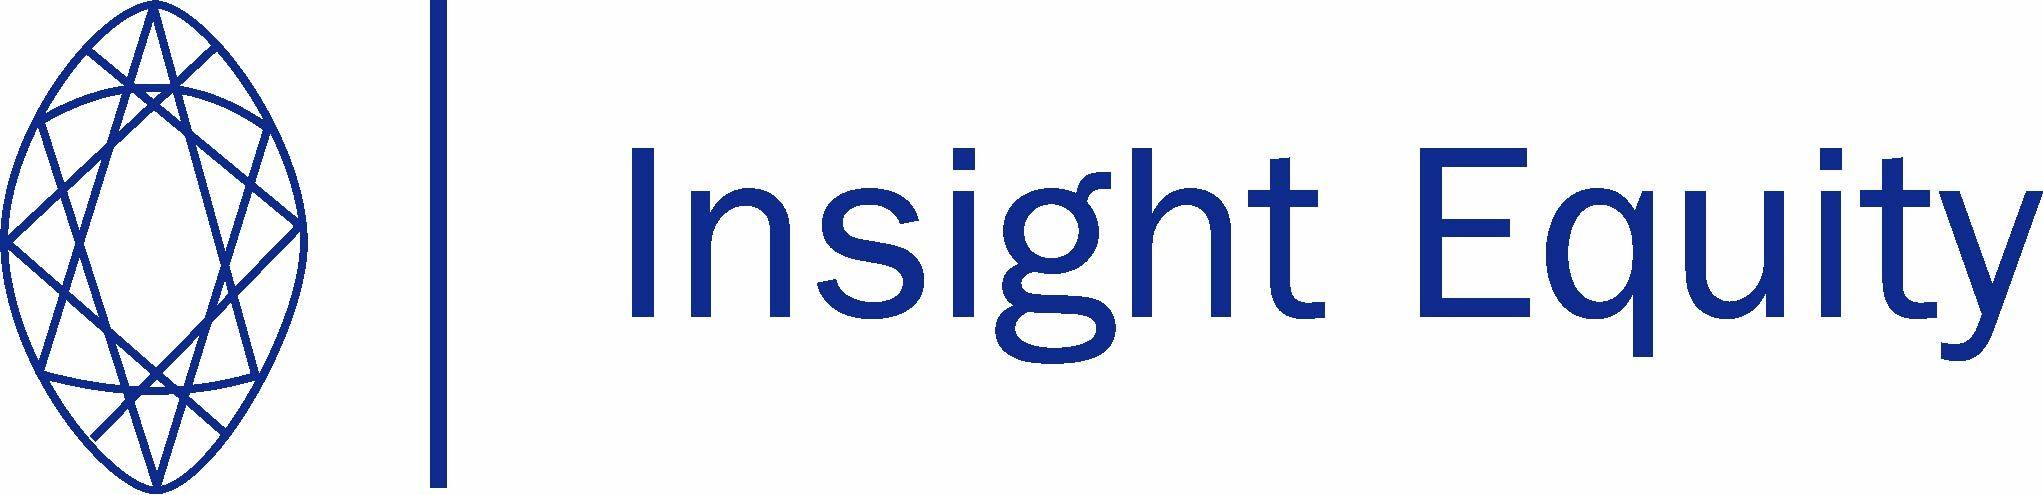 Panolam Logo - insight equity logo revised | Panolam Surface Systems